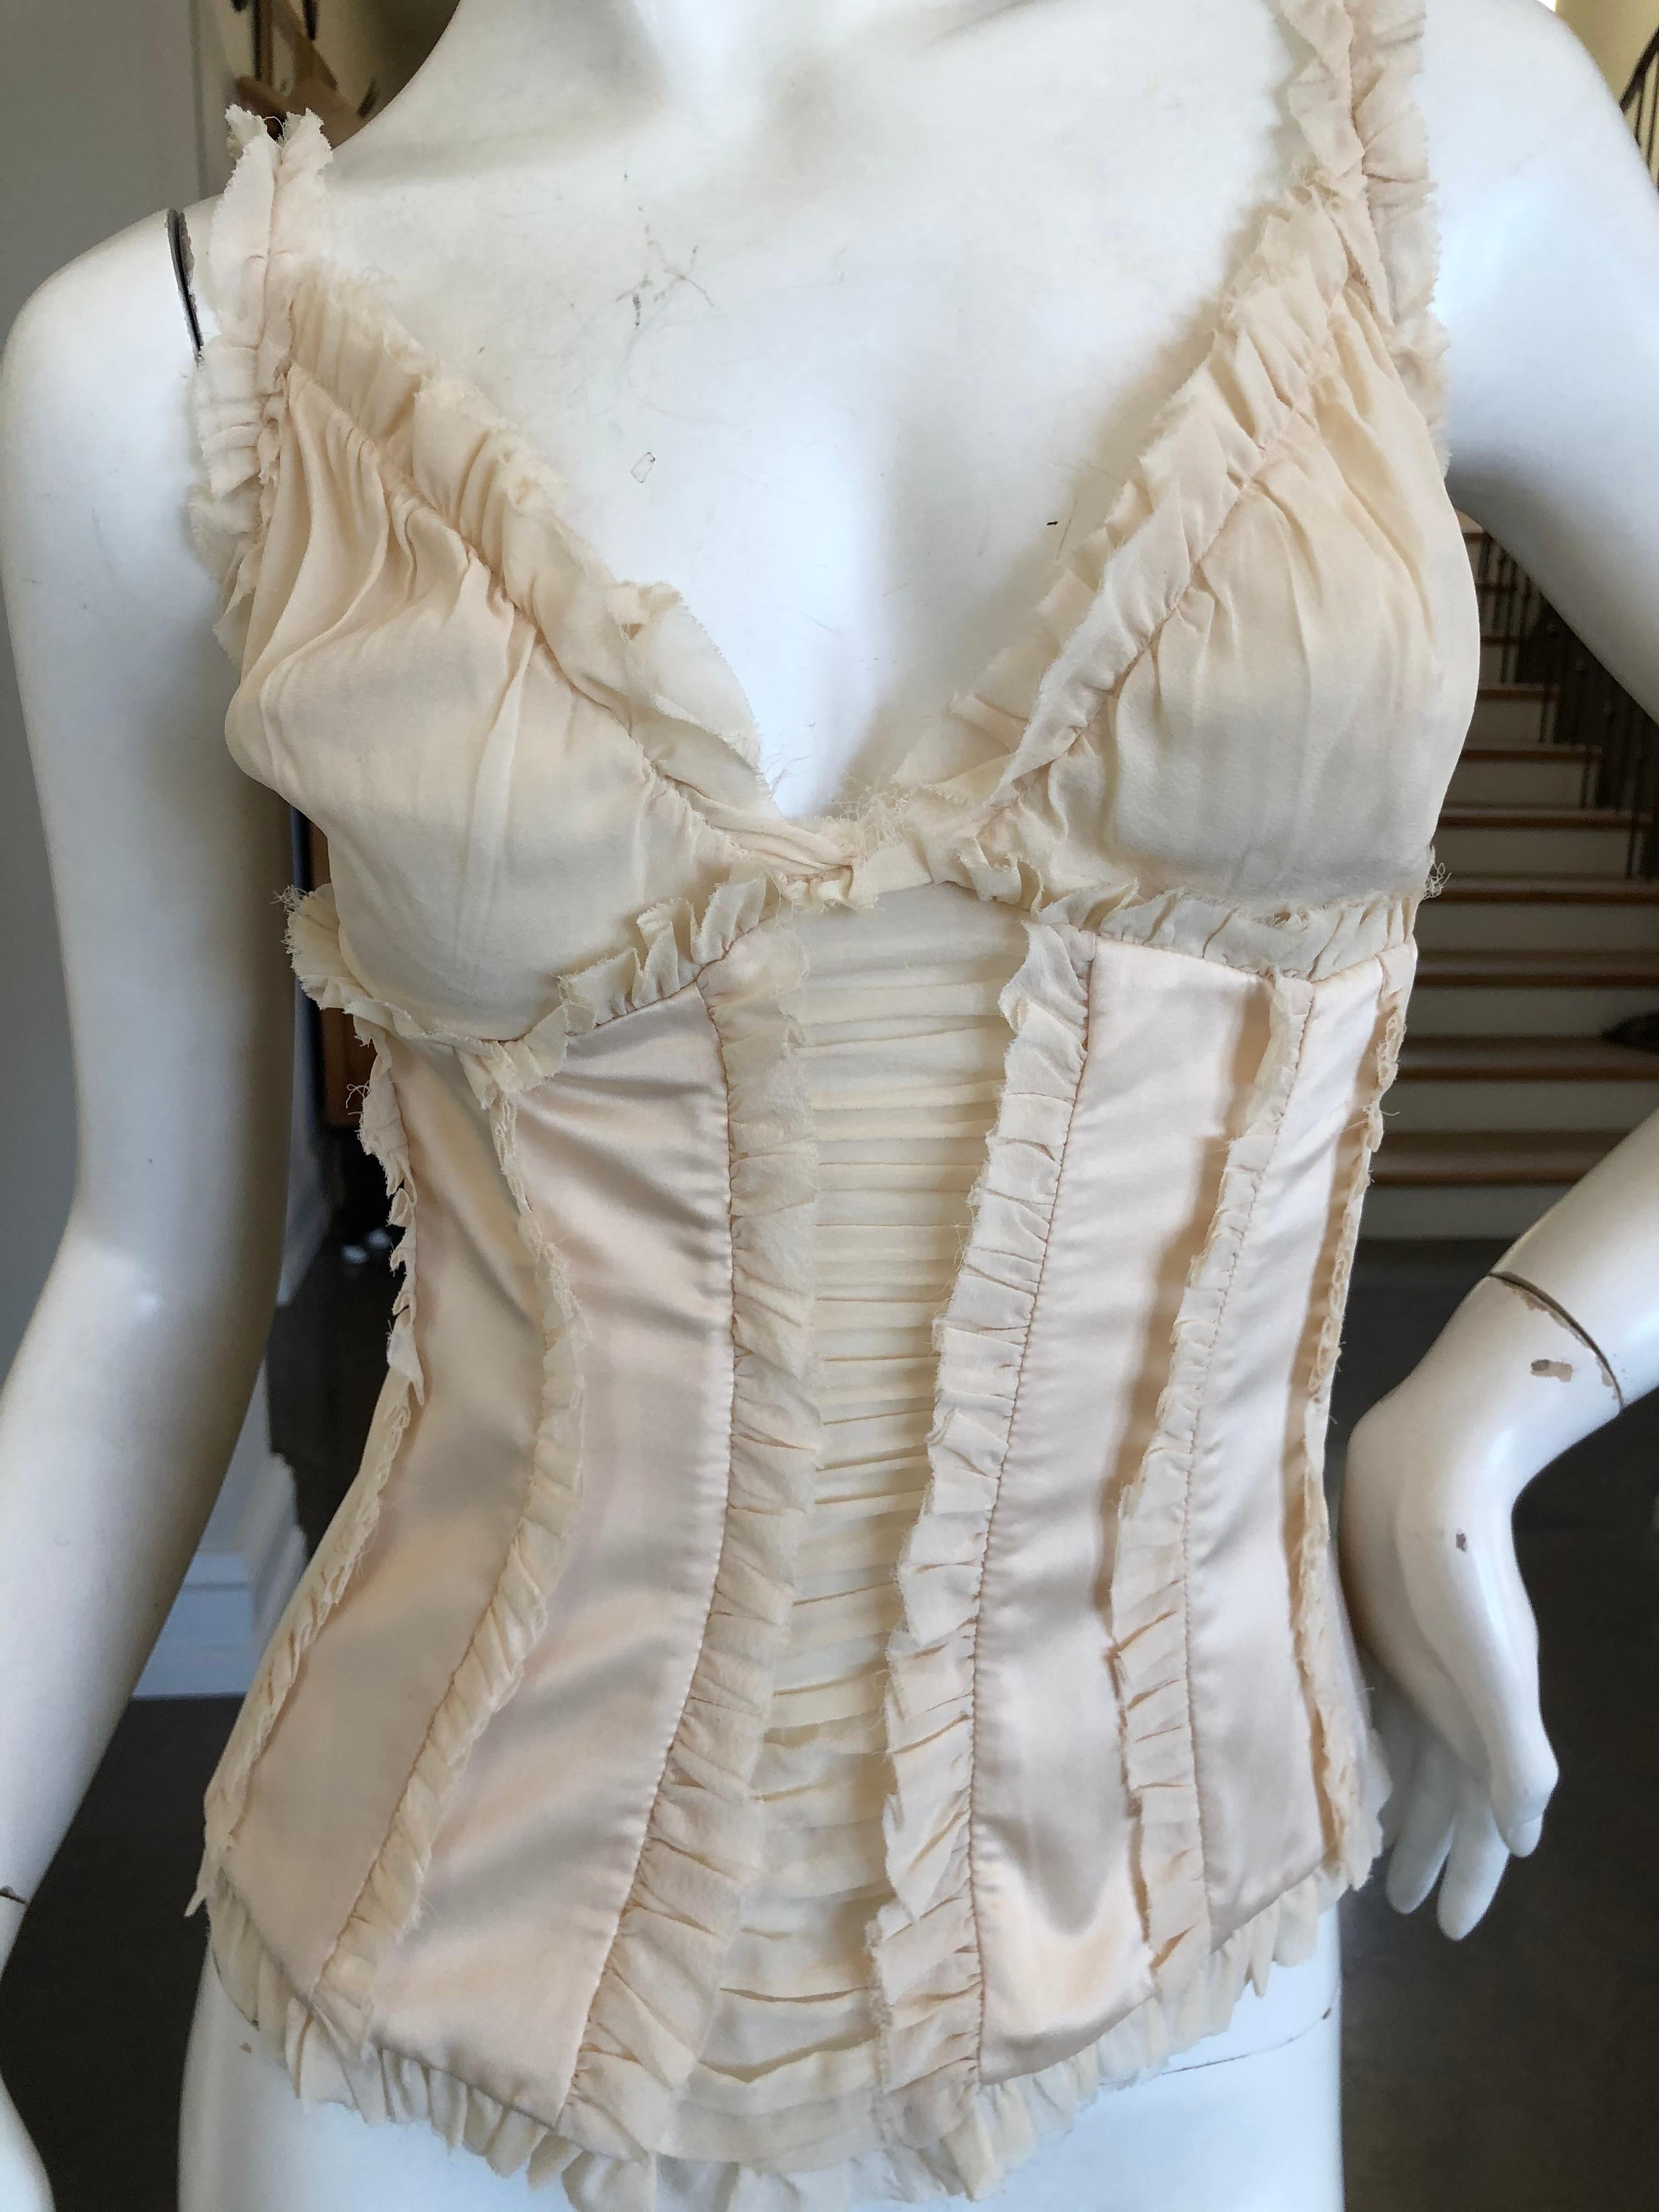 Roberto Cavalli for Just Cavalli Ivory Ruffled Corset 
Wonderful piece , front and back.
Size 44
Bust 34